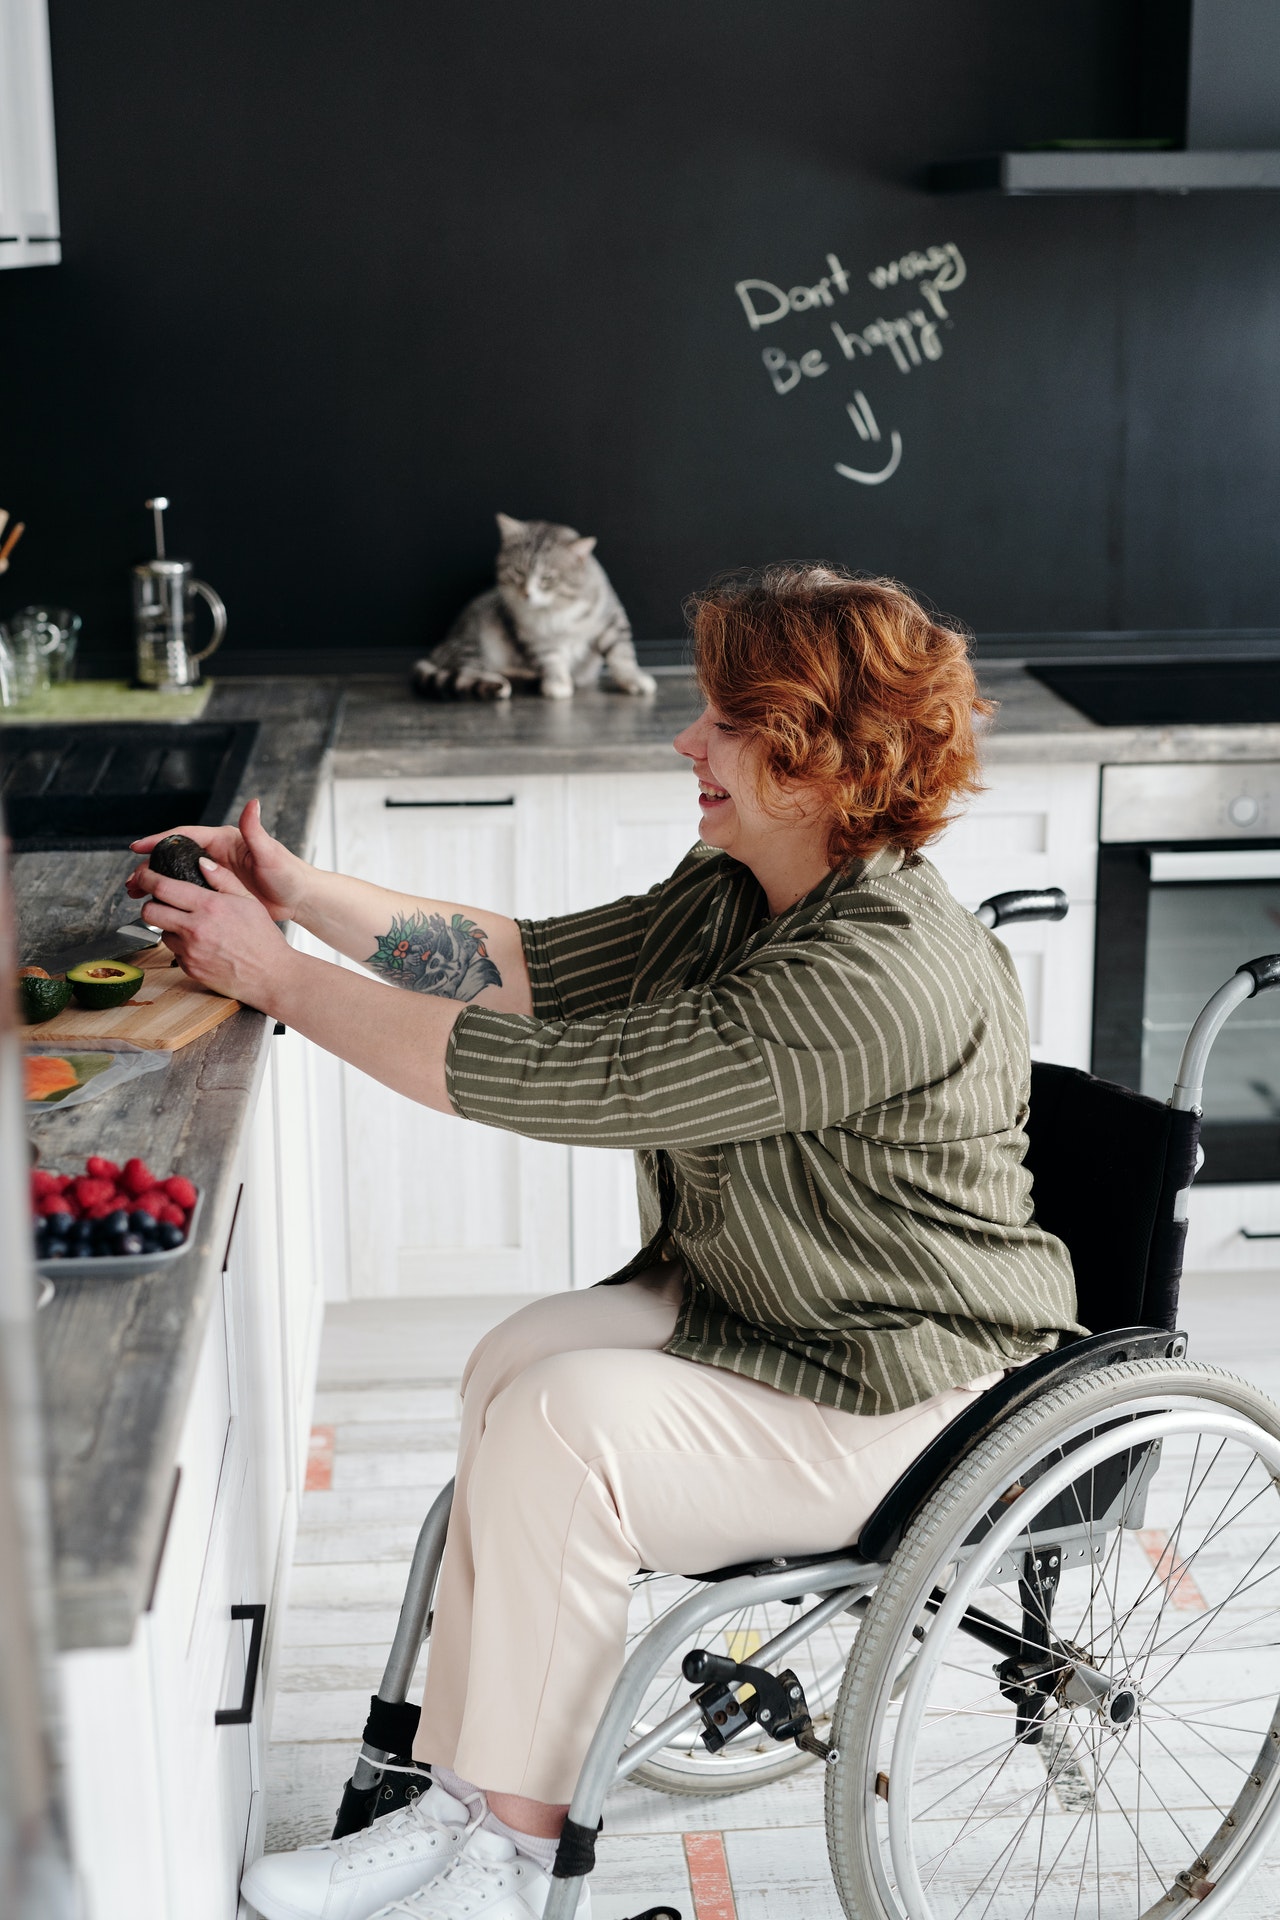 6 Tips for Disability Limitations and House Cleaning